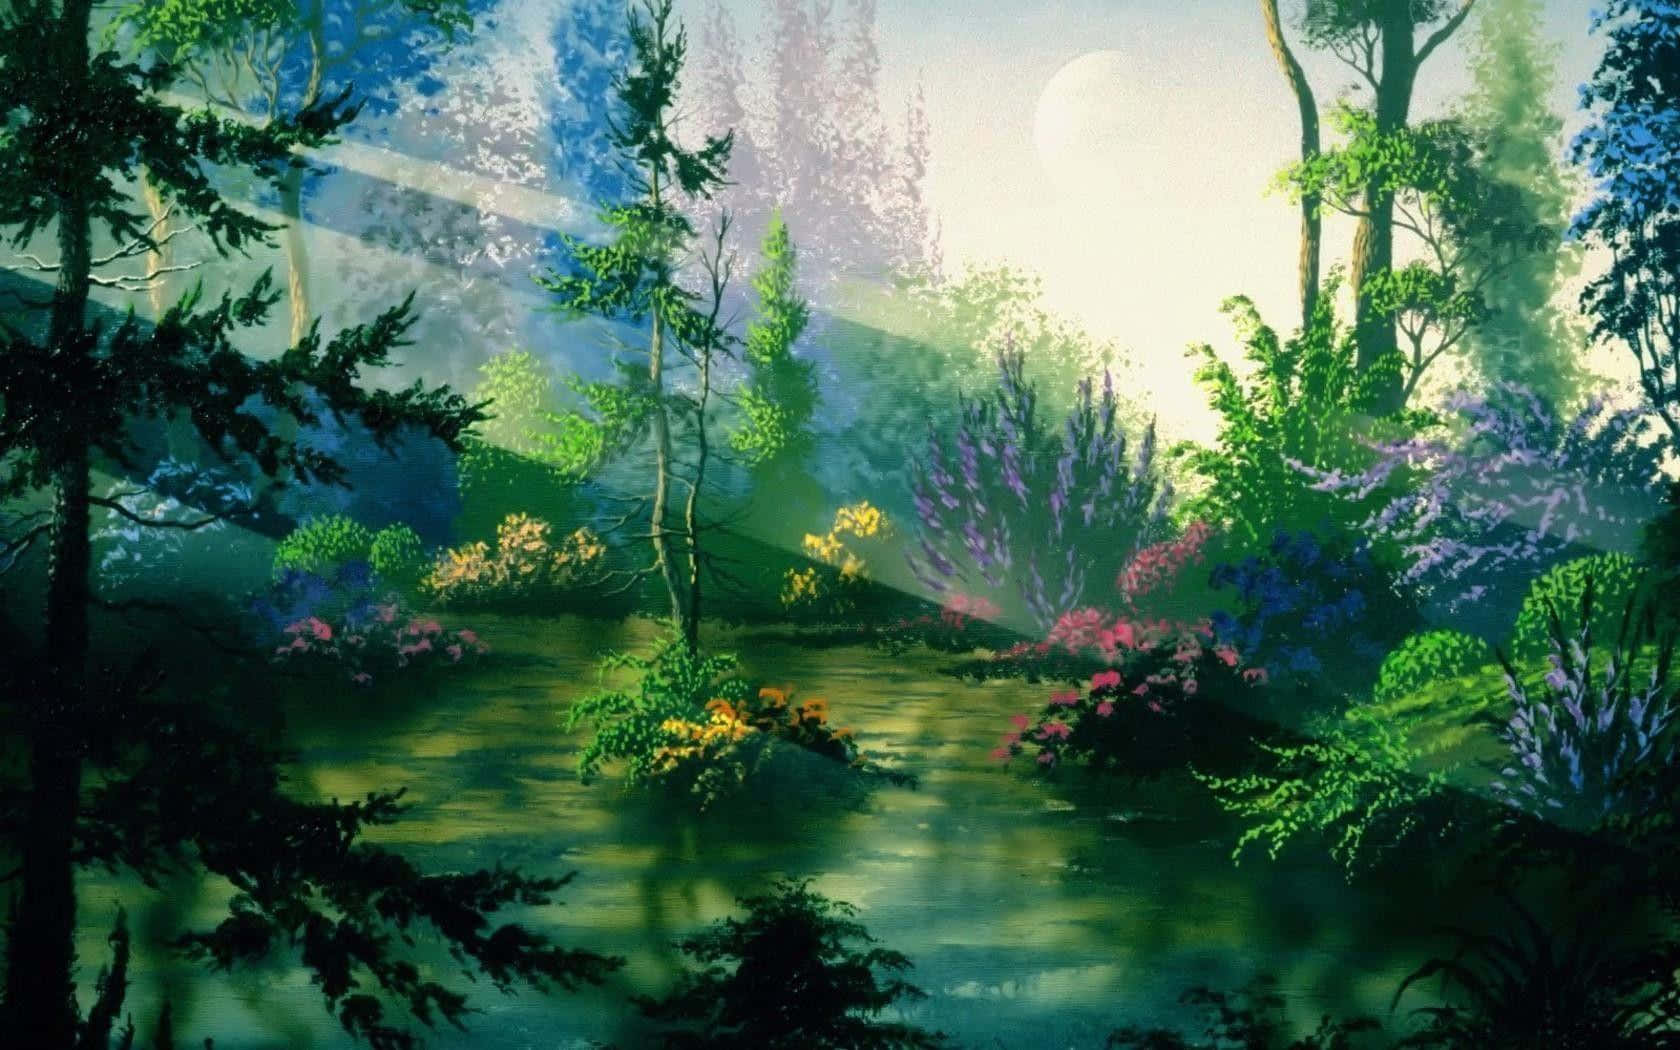 Get lost in the breathtaking Anime Forest